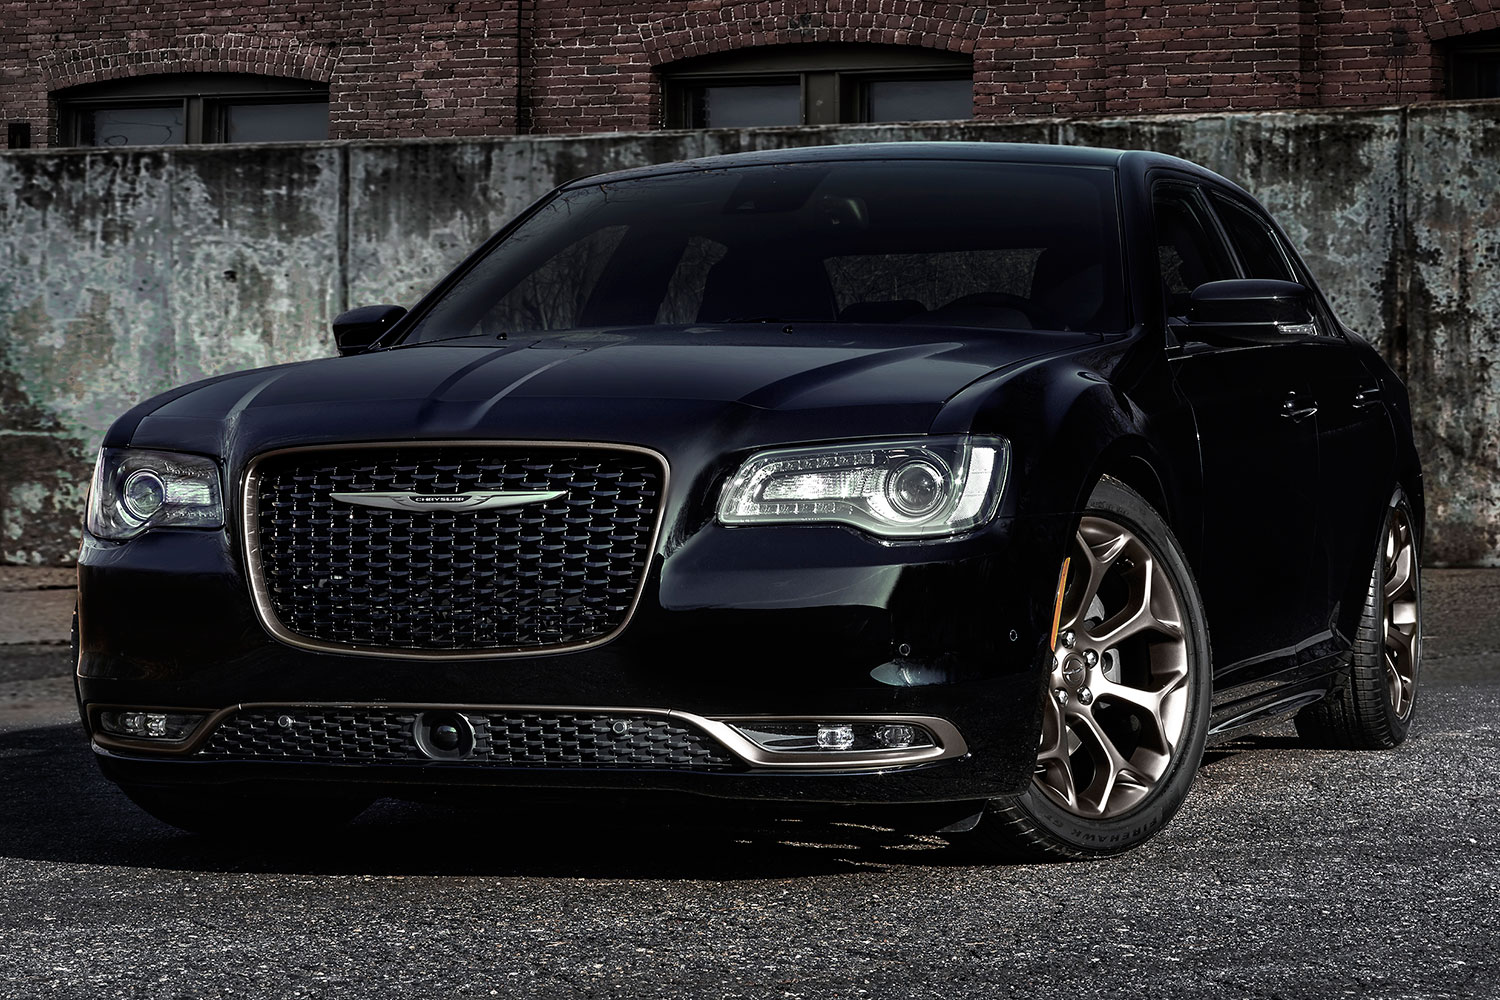 2019 chrysler 300 news rumors specs 2016 300s alloy edition featured